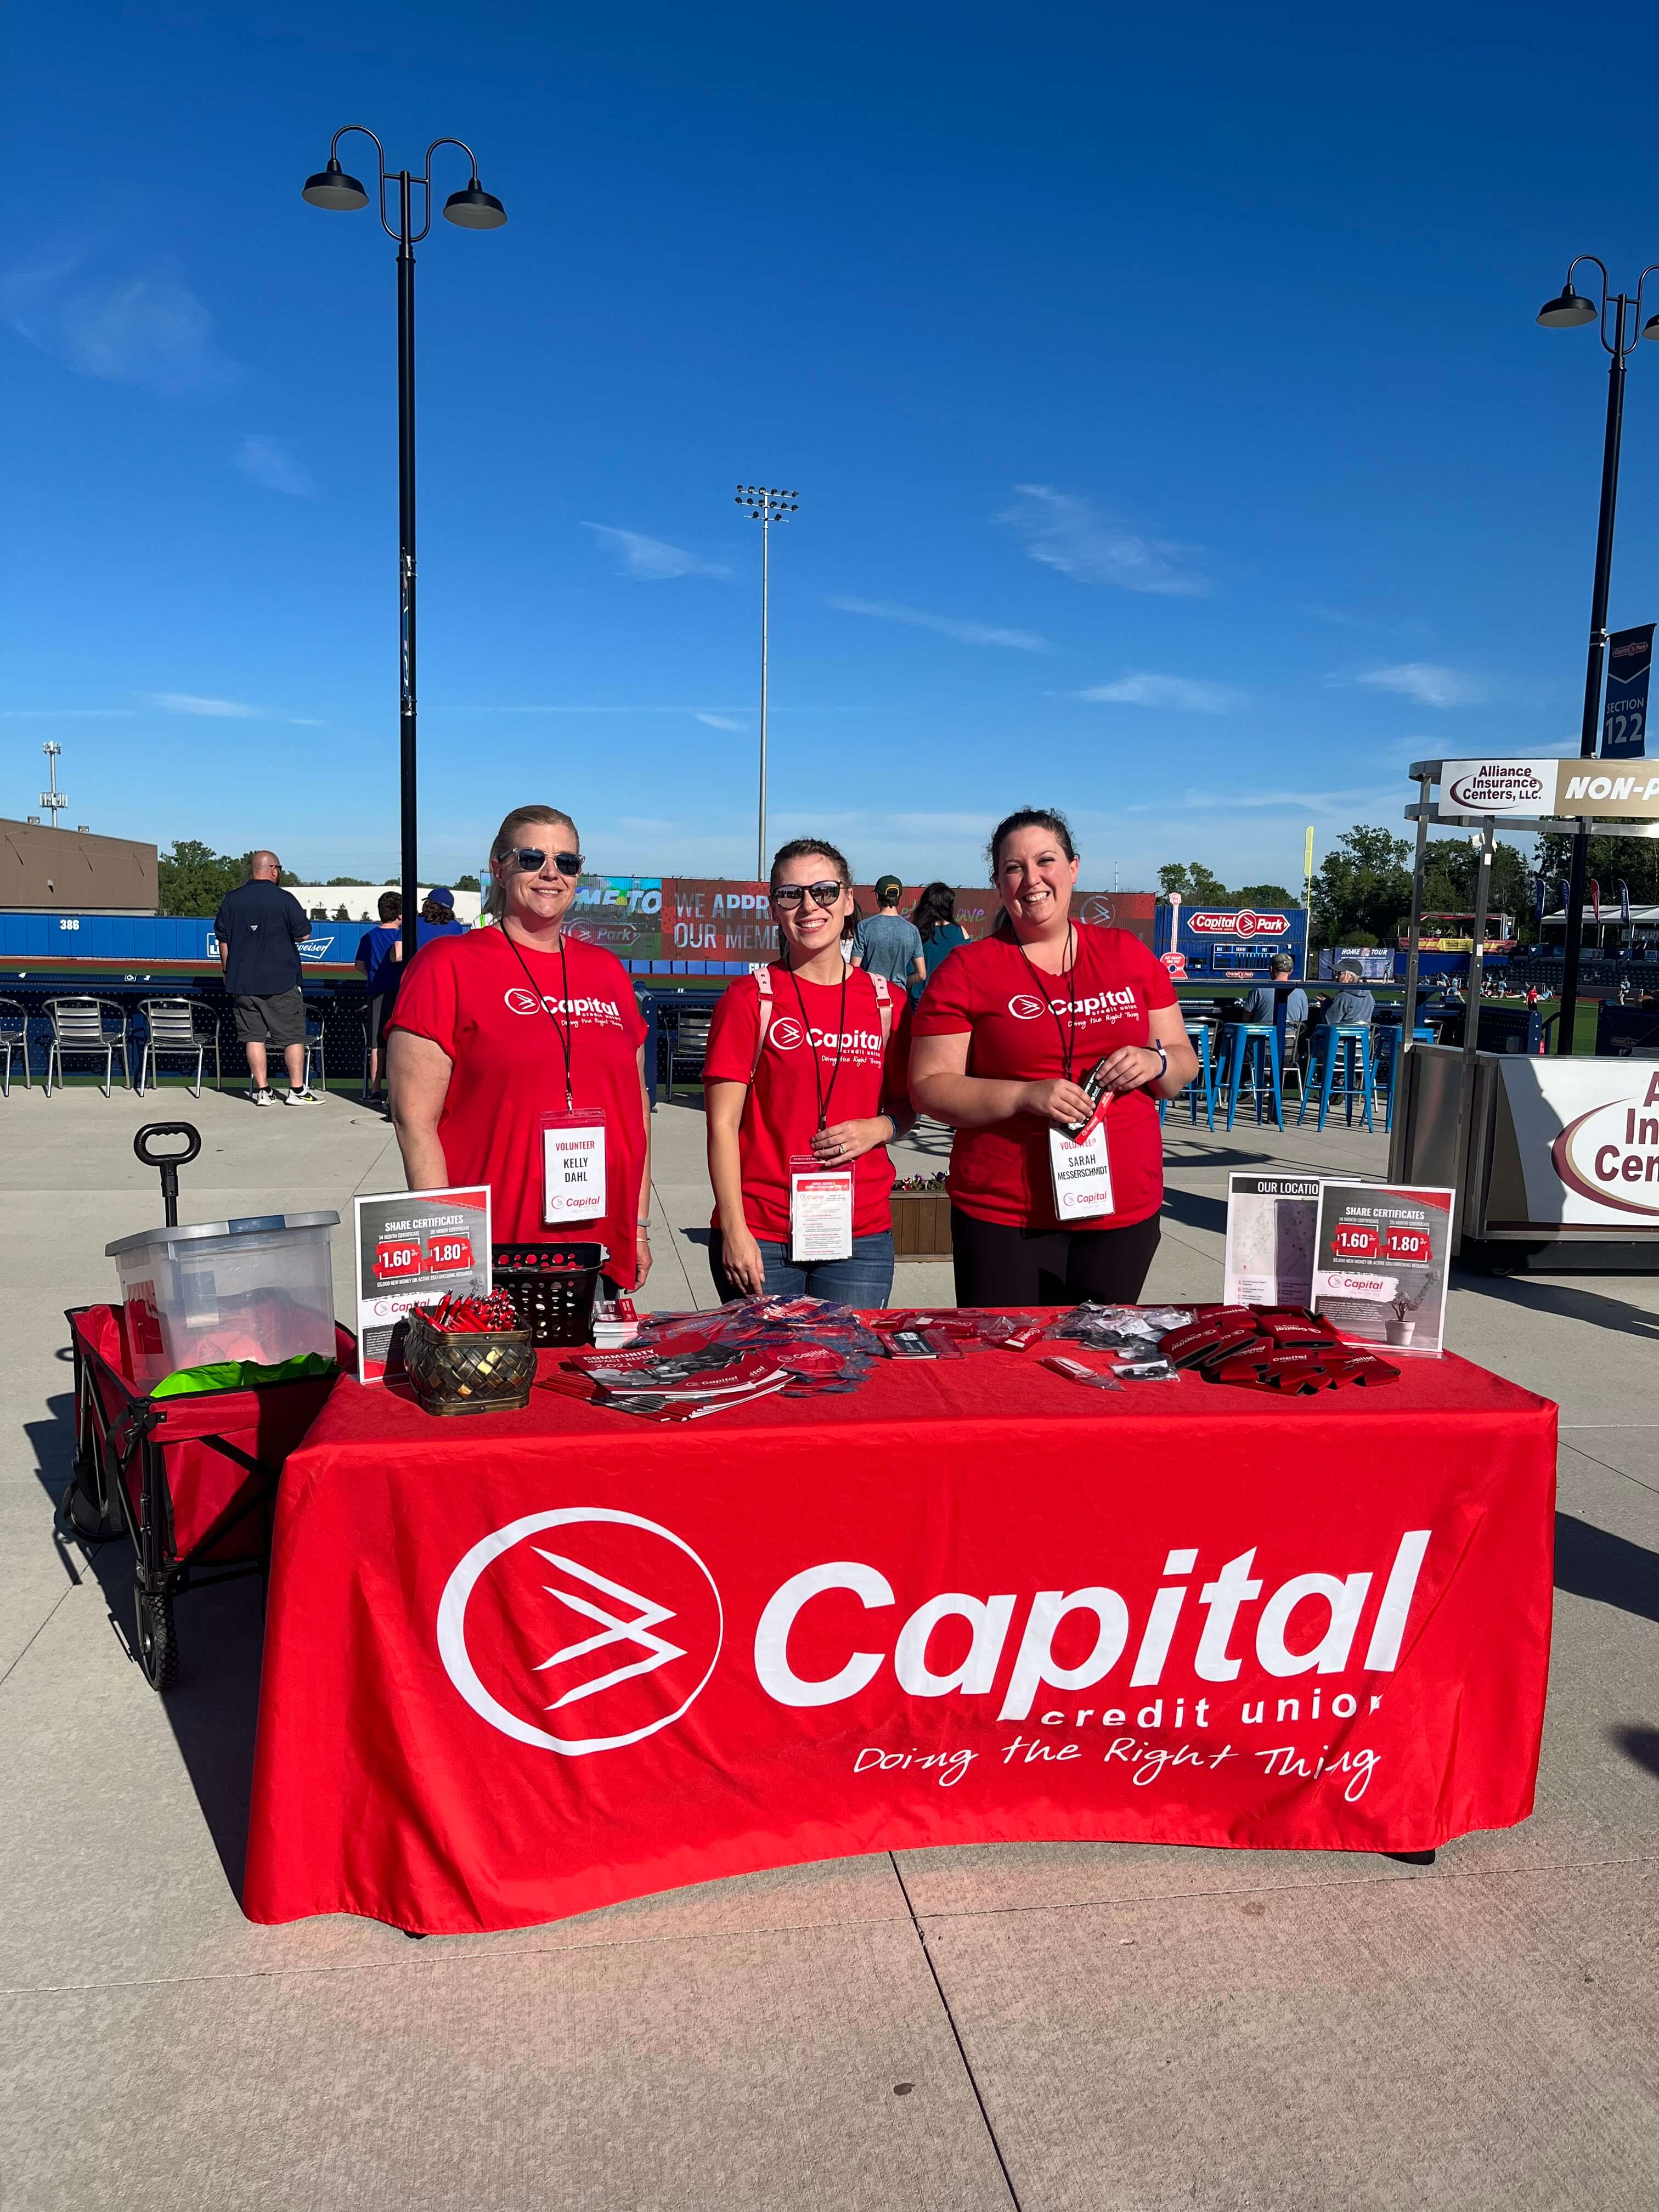 Capital Employees in Capital shirt.